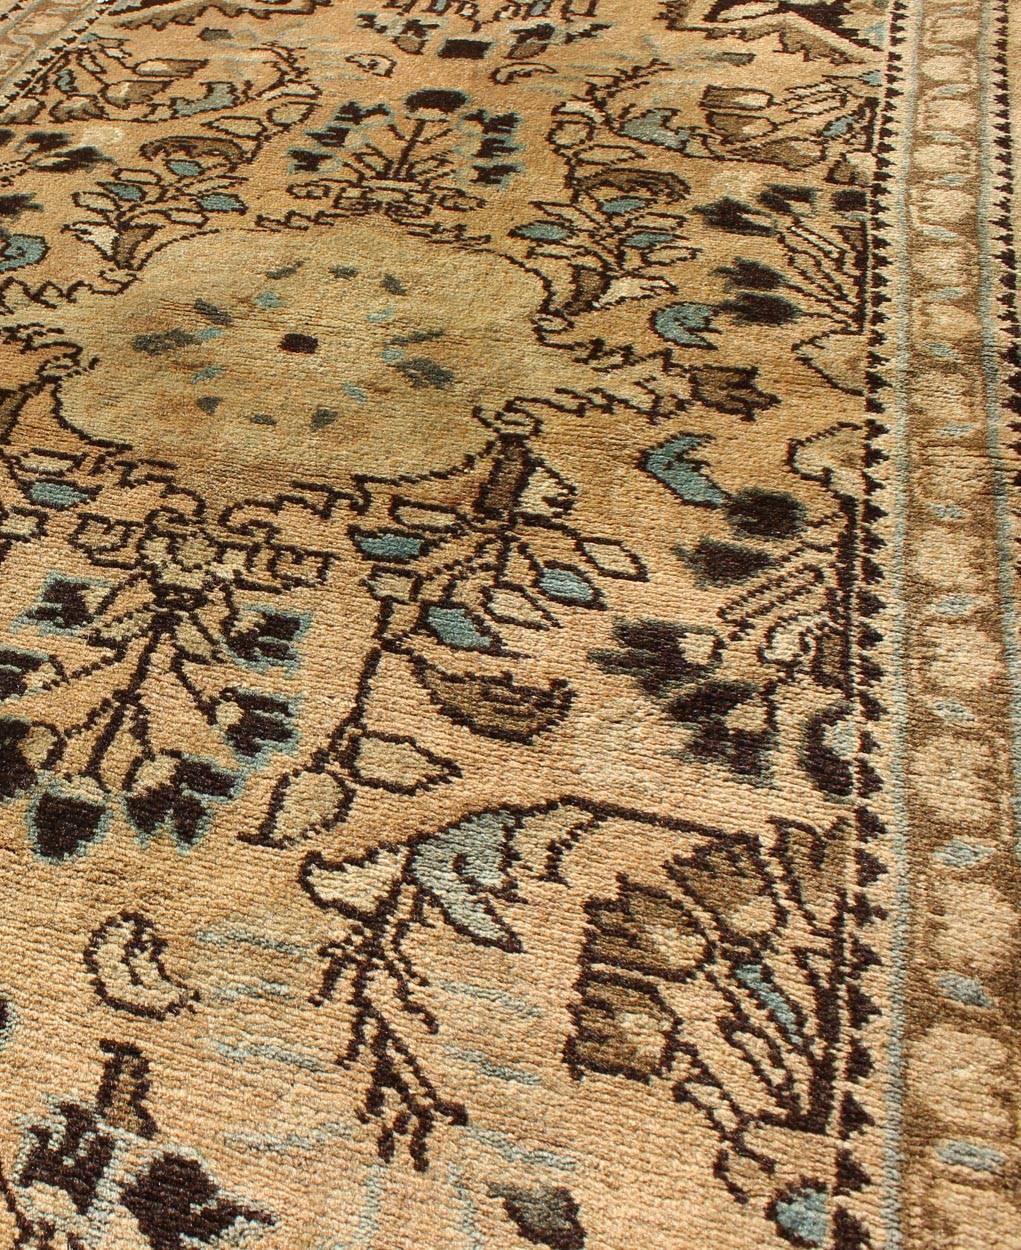 20th Century Vintage Persian Tabriz Rug with Center Medallion Design in Neutral Color Palette